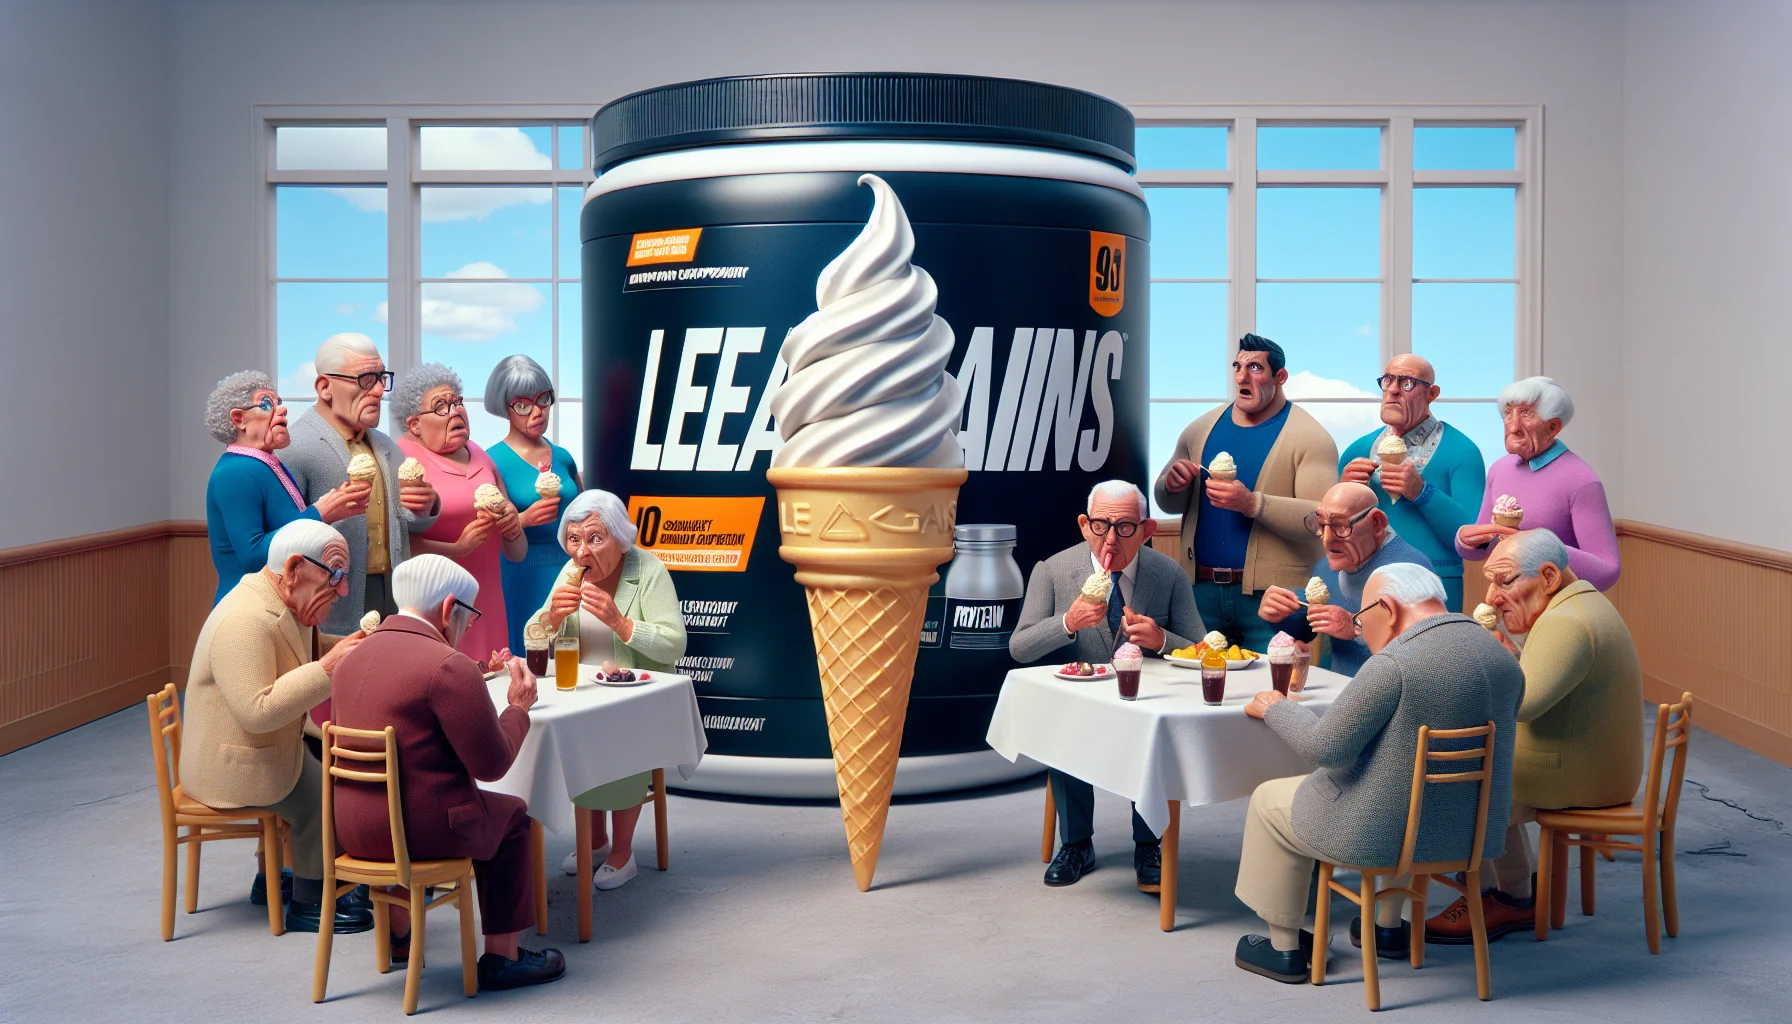 An amusingly realistic scene featuring a group of elderly individuals with diverse descents partaking in their daily diet routine. It includes a cone of leangains protein towering above a regular ice-cream cone, causing a humorous confusion among the group. They dignifiedly struggle to decide if they should substitute their usual sweet treats for the gigantic protein supplement. Emphasize the juxtaposition of traditional diet norms against the modern health trend of protein supplements in their comical expressions and reactions.